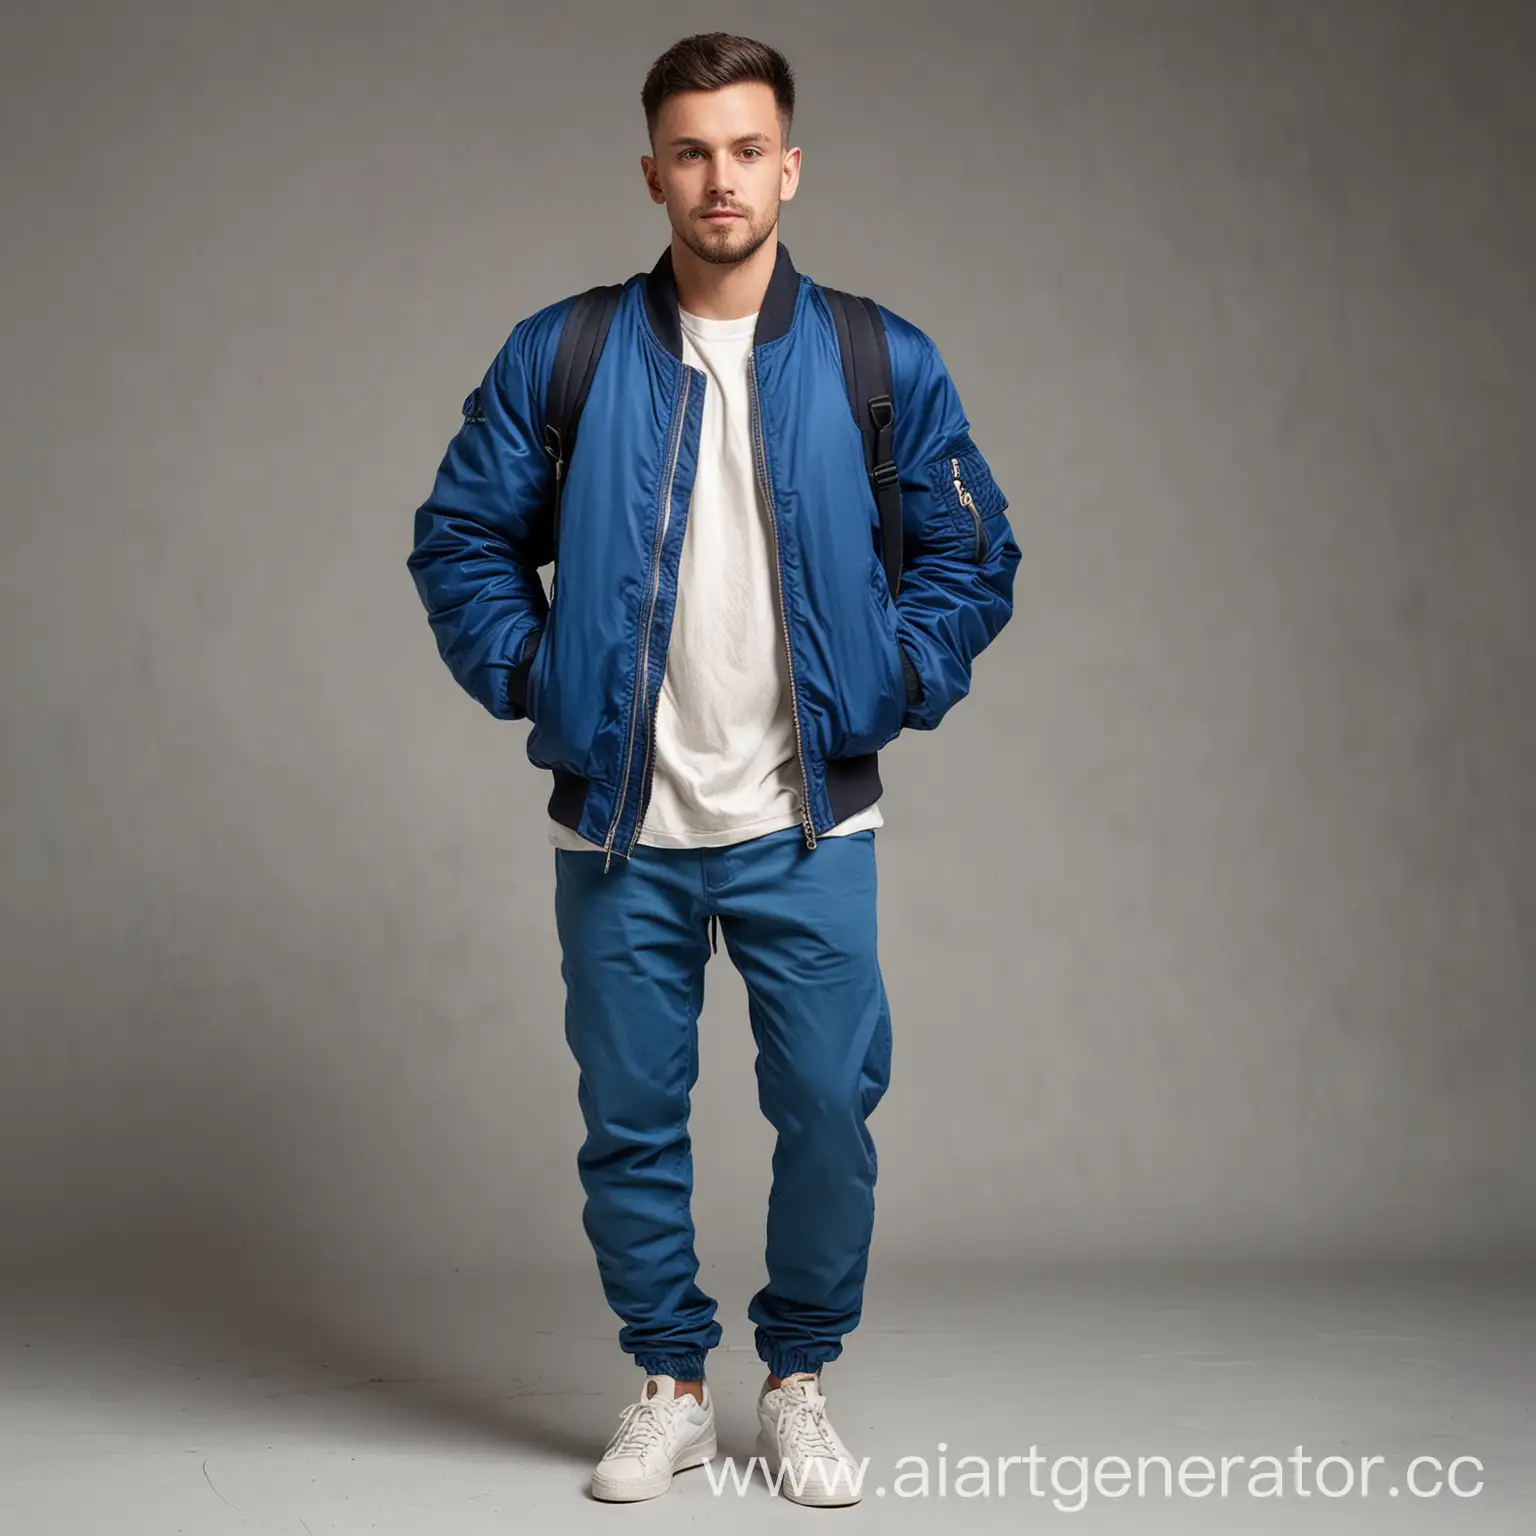 Man-in-Blue-Bomber-Jacket-and-Backpack-Poses-for-Photo